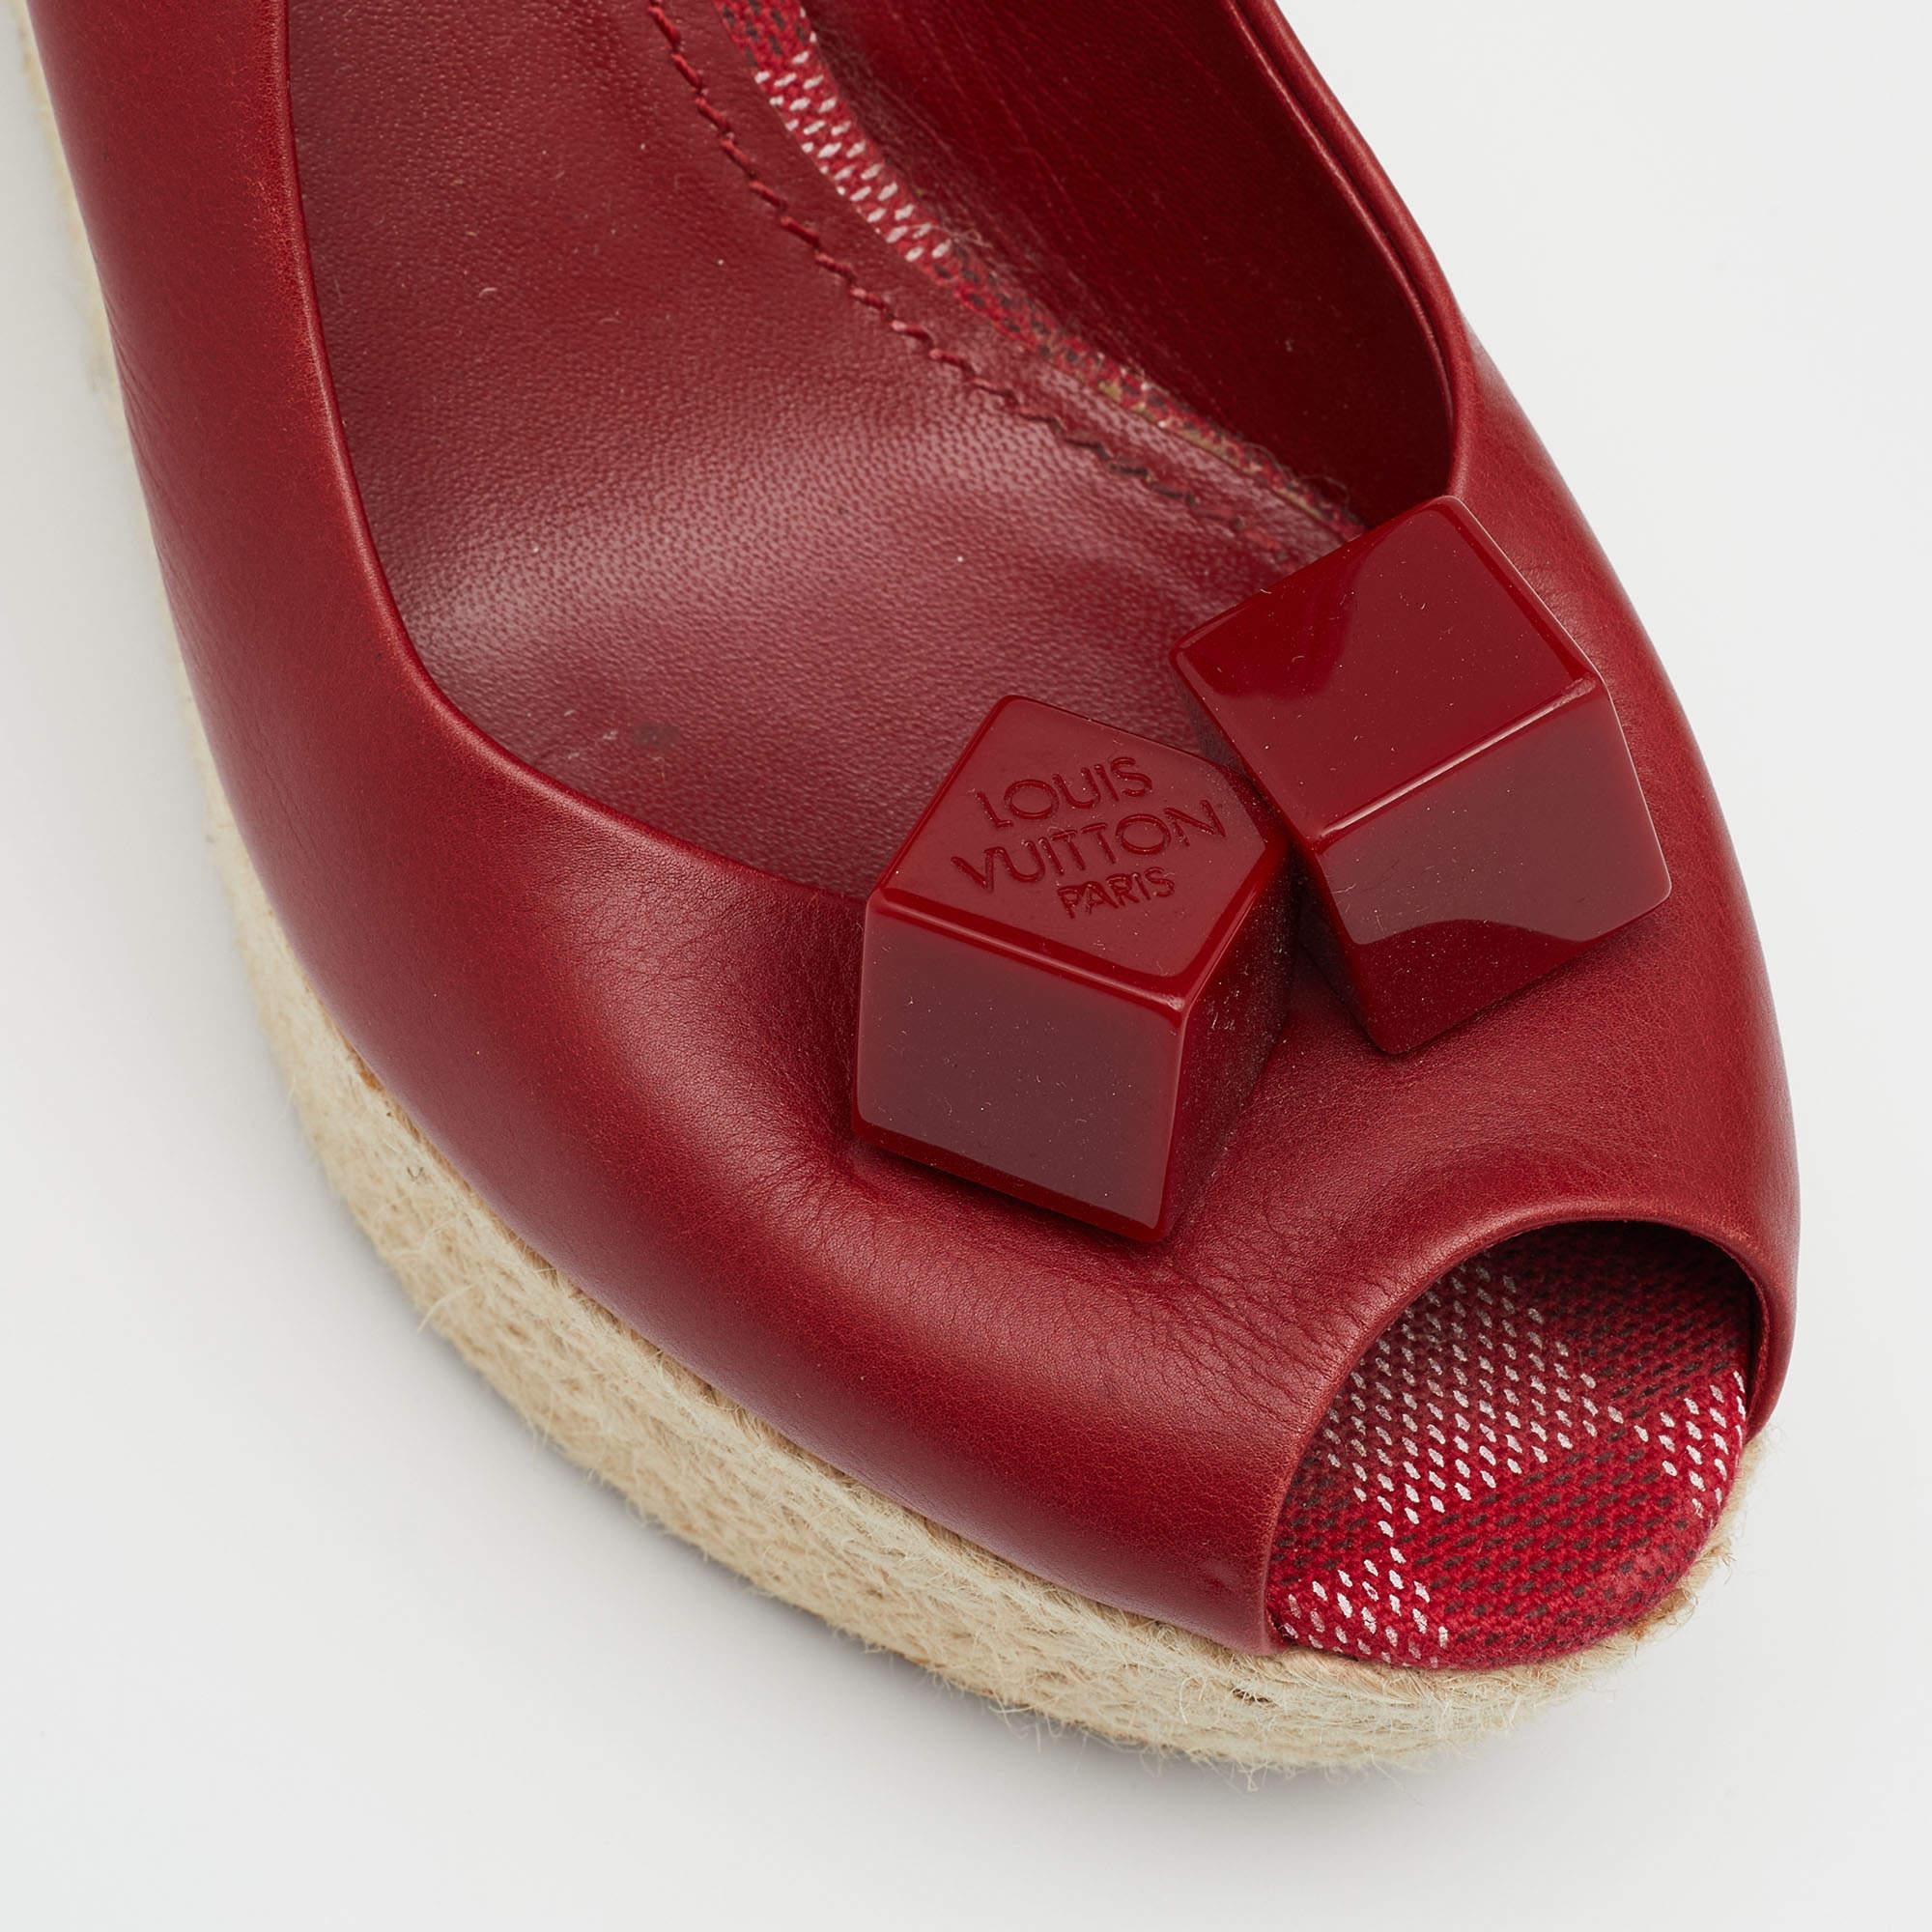 Louis Vuitton Red Leather Gossip Cube Embellished Espadrille Wedge Peep Toe Slin 2